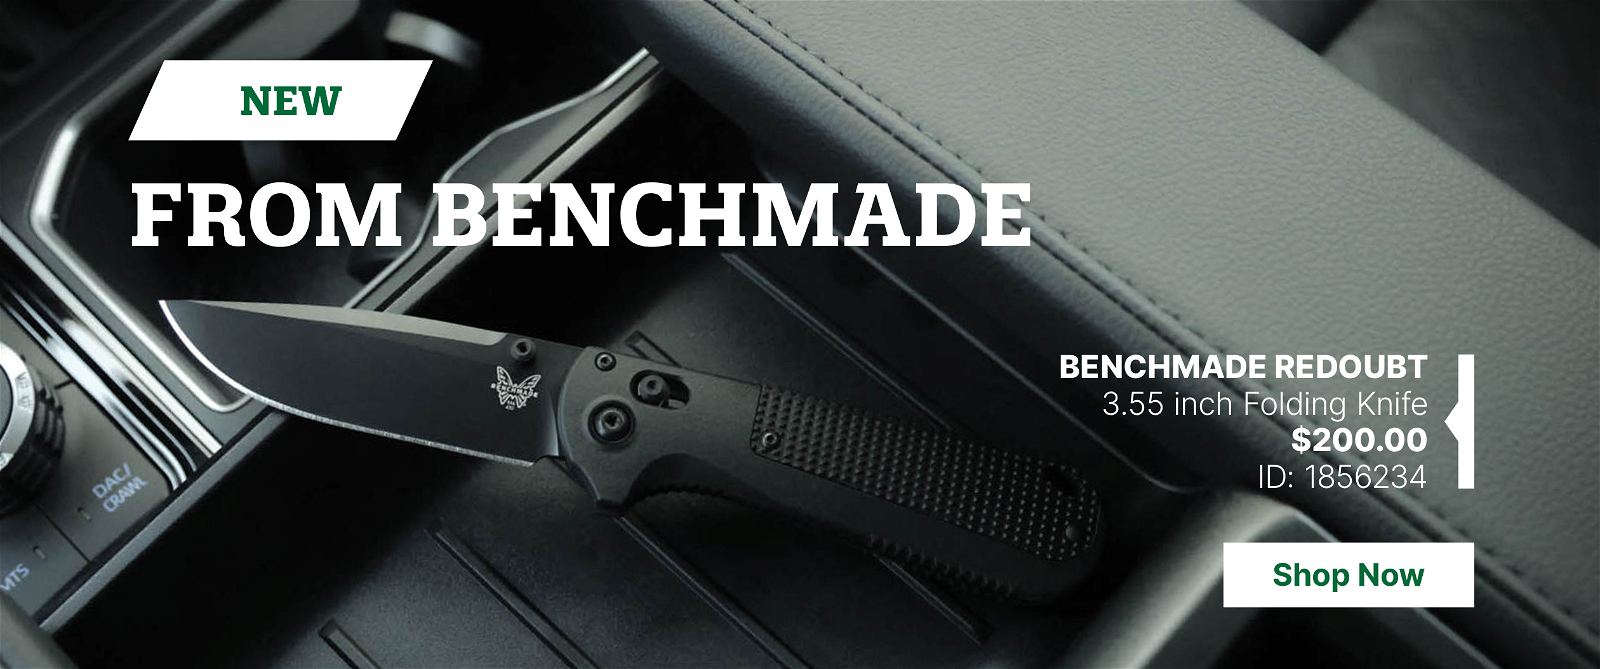 New from Benchmade